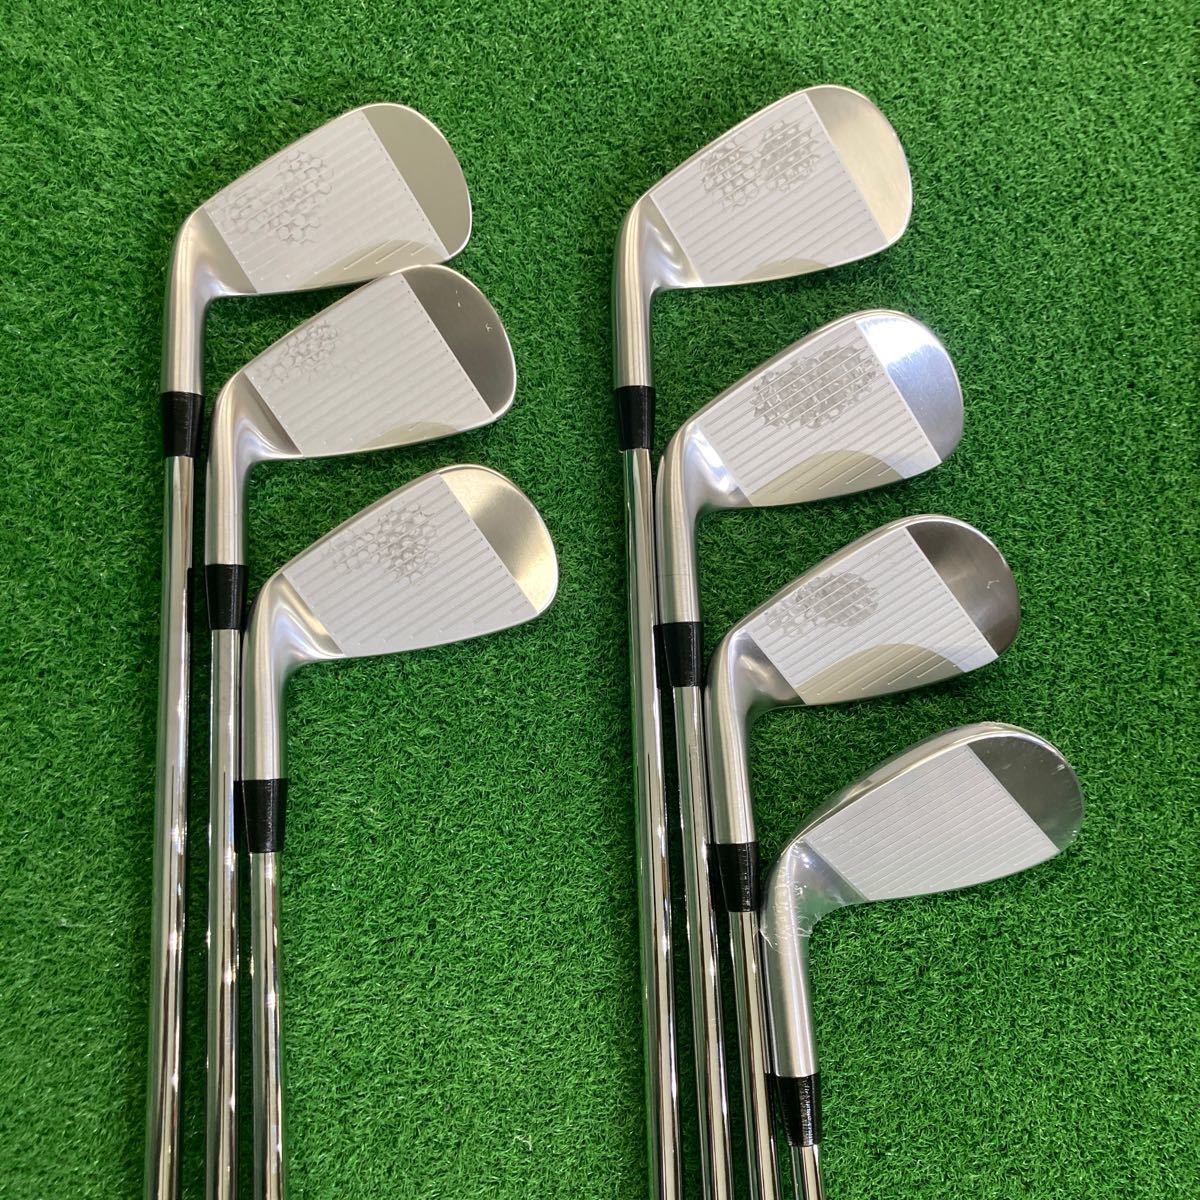 EPONGOLFエポンゴルフ AF-707 5-AW 7本セット モーダス120/S中古美品_画像3